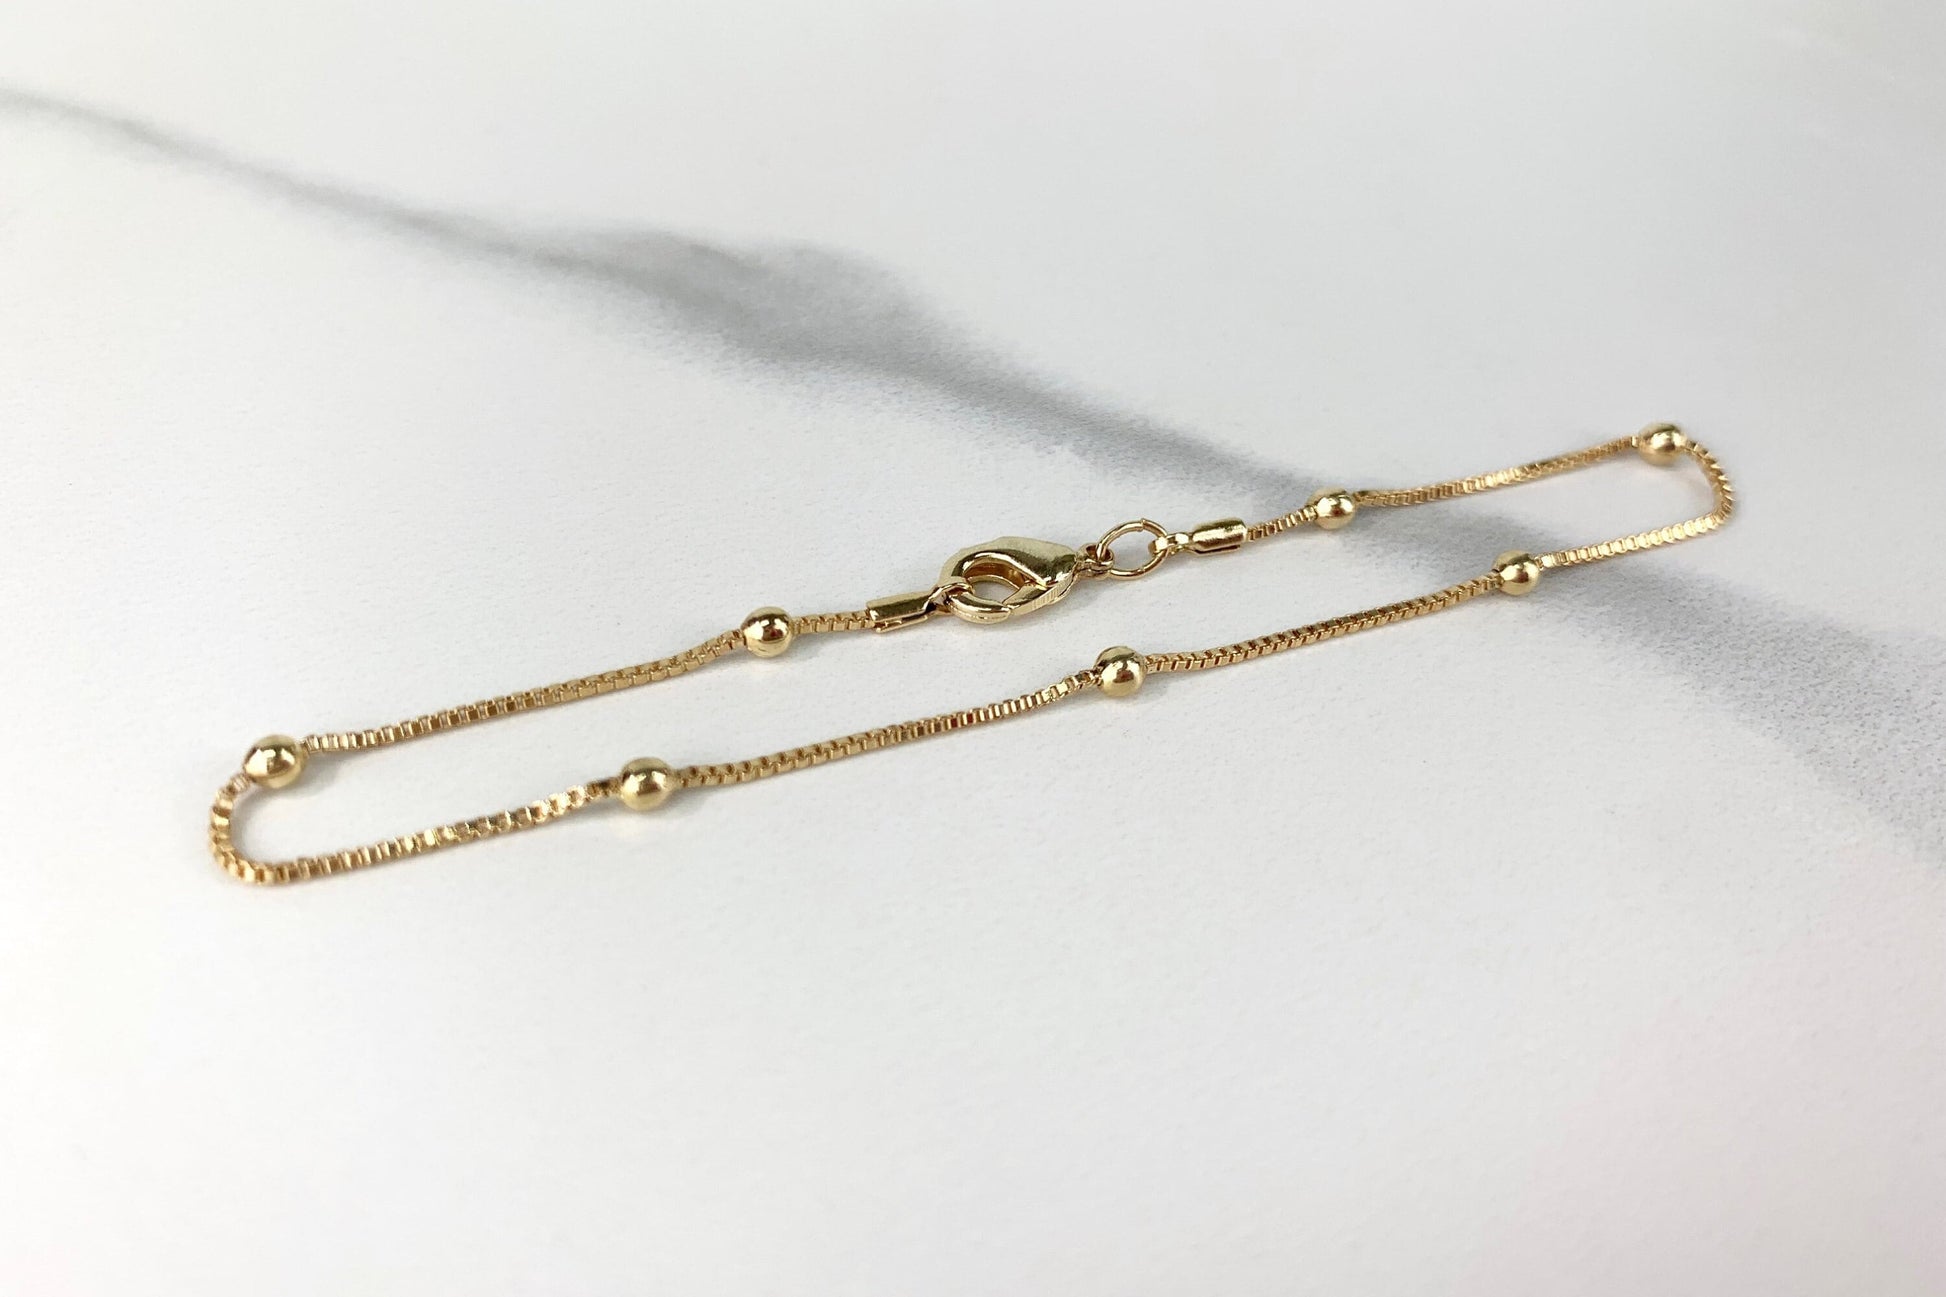 18k Gold Filled 1mm Bead Chain Satellite Chain Bracelet For Wholesale and Jewelry Supplies, Making Supplies